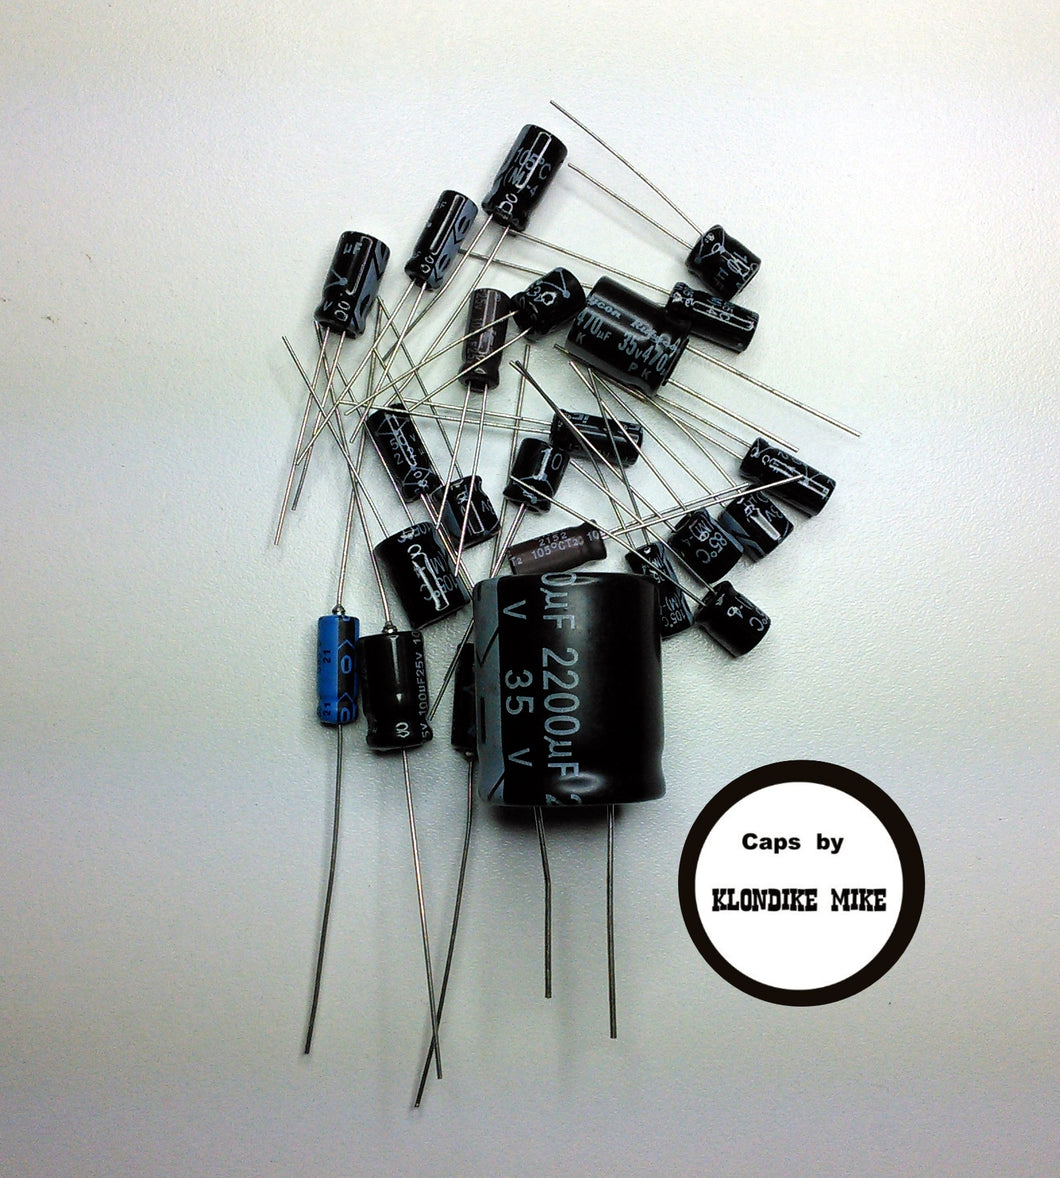 HY-GAIN 623 / 623A electrolytic capacitor kit